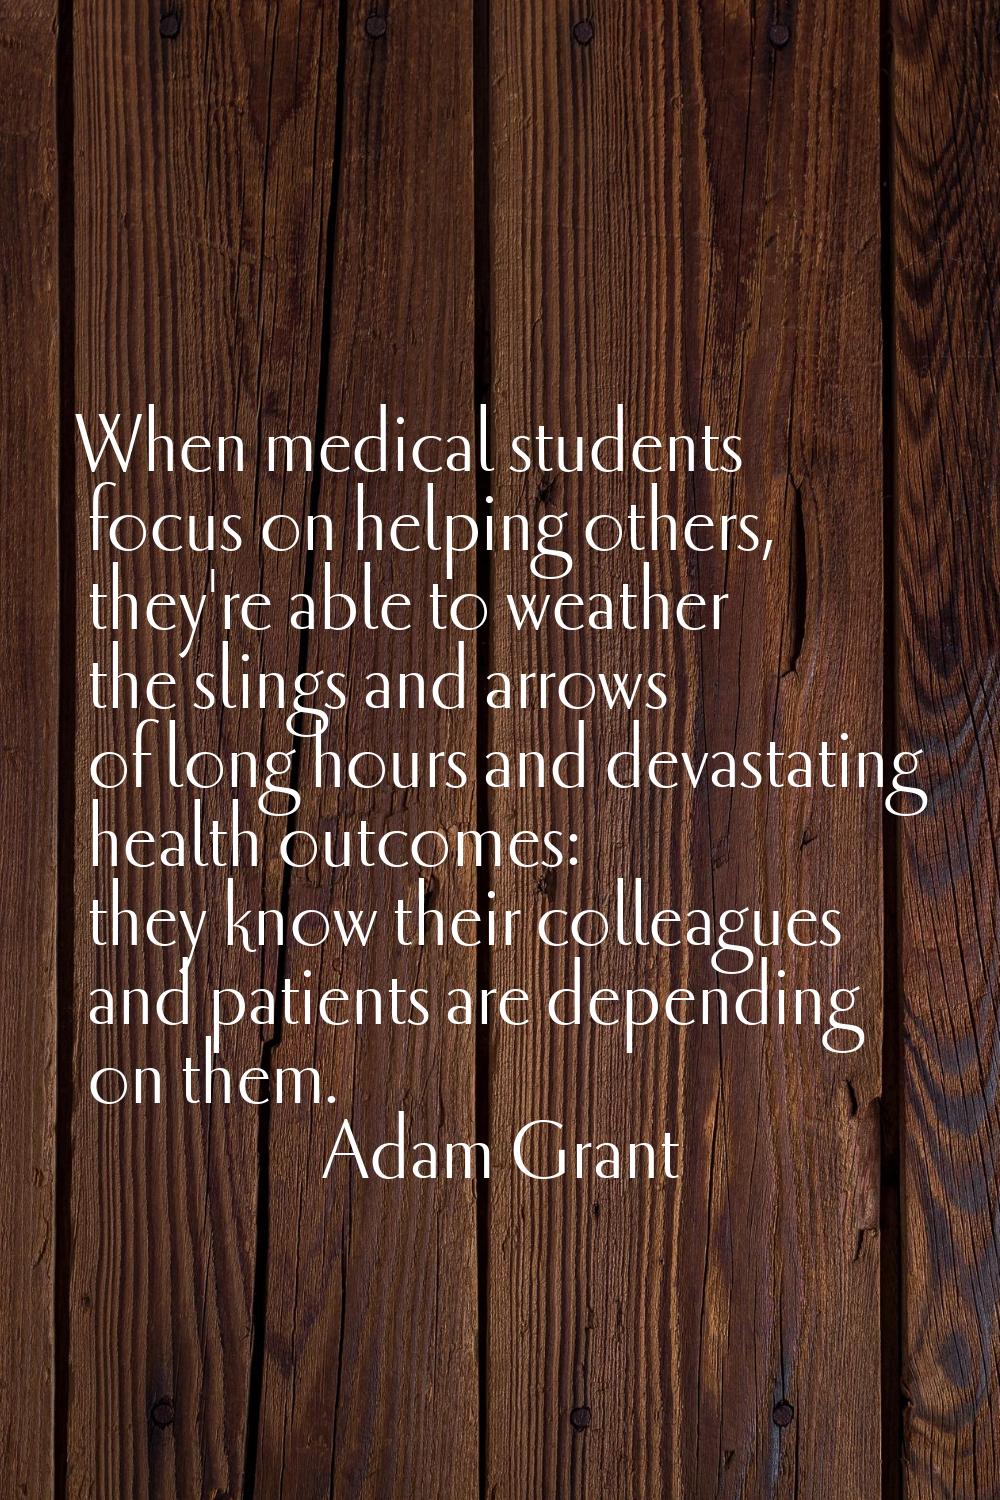 When medical students focus on helping others, they're able to weather the slings and arrows of lon